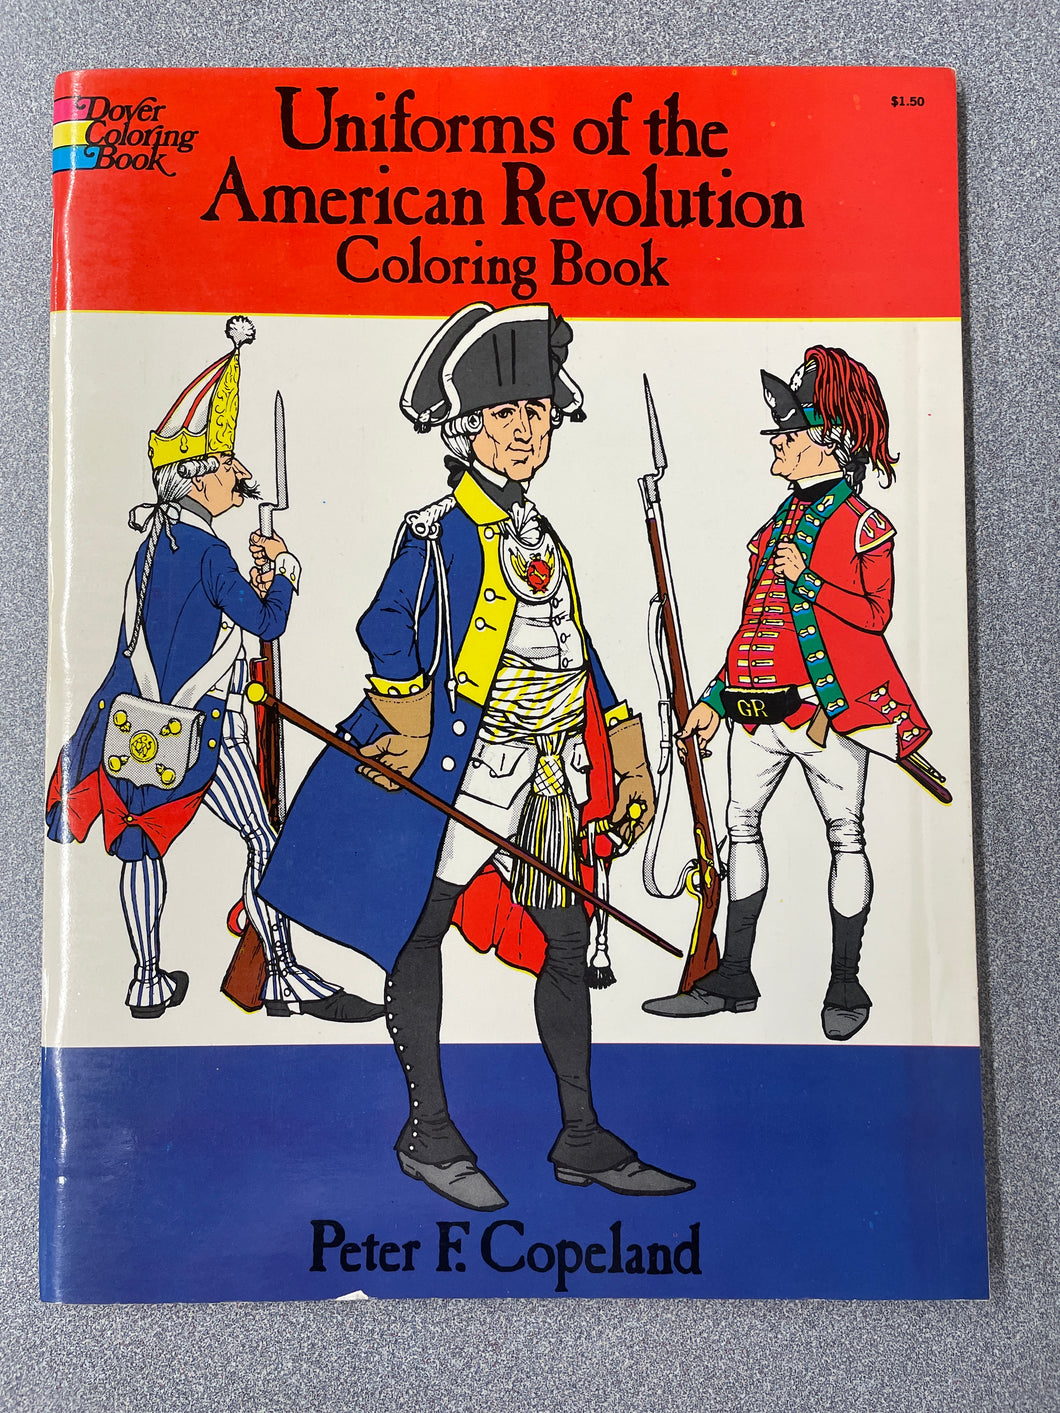 Uniforms of the American Revolution Coloring Book, Copeland, Peter F. [1974] CN 2/24